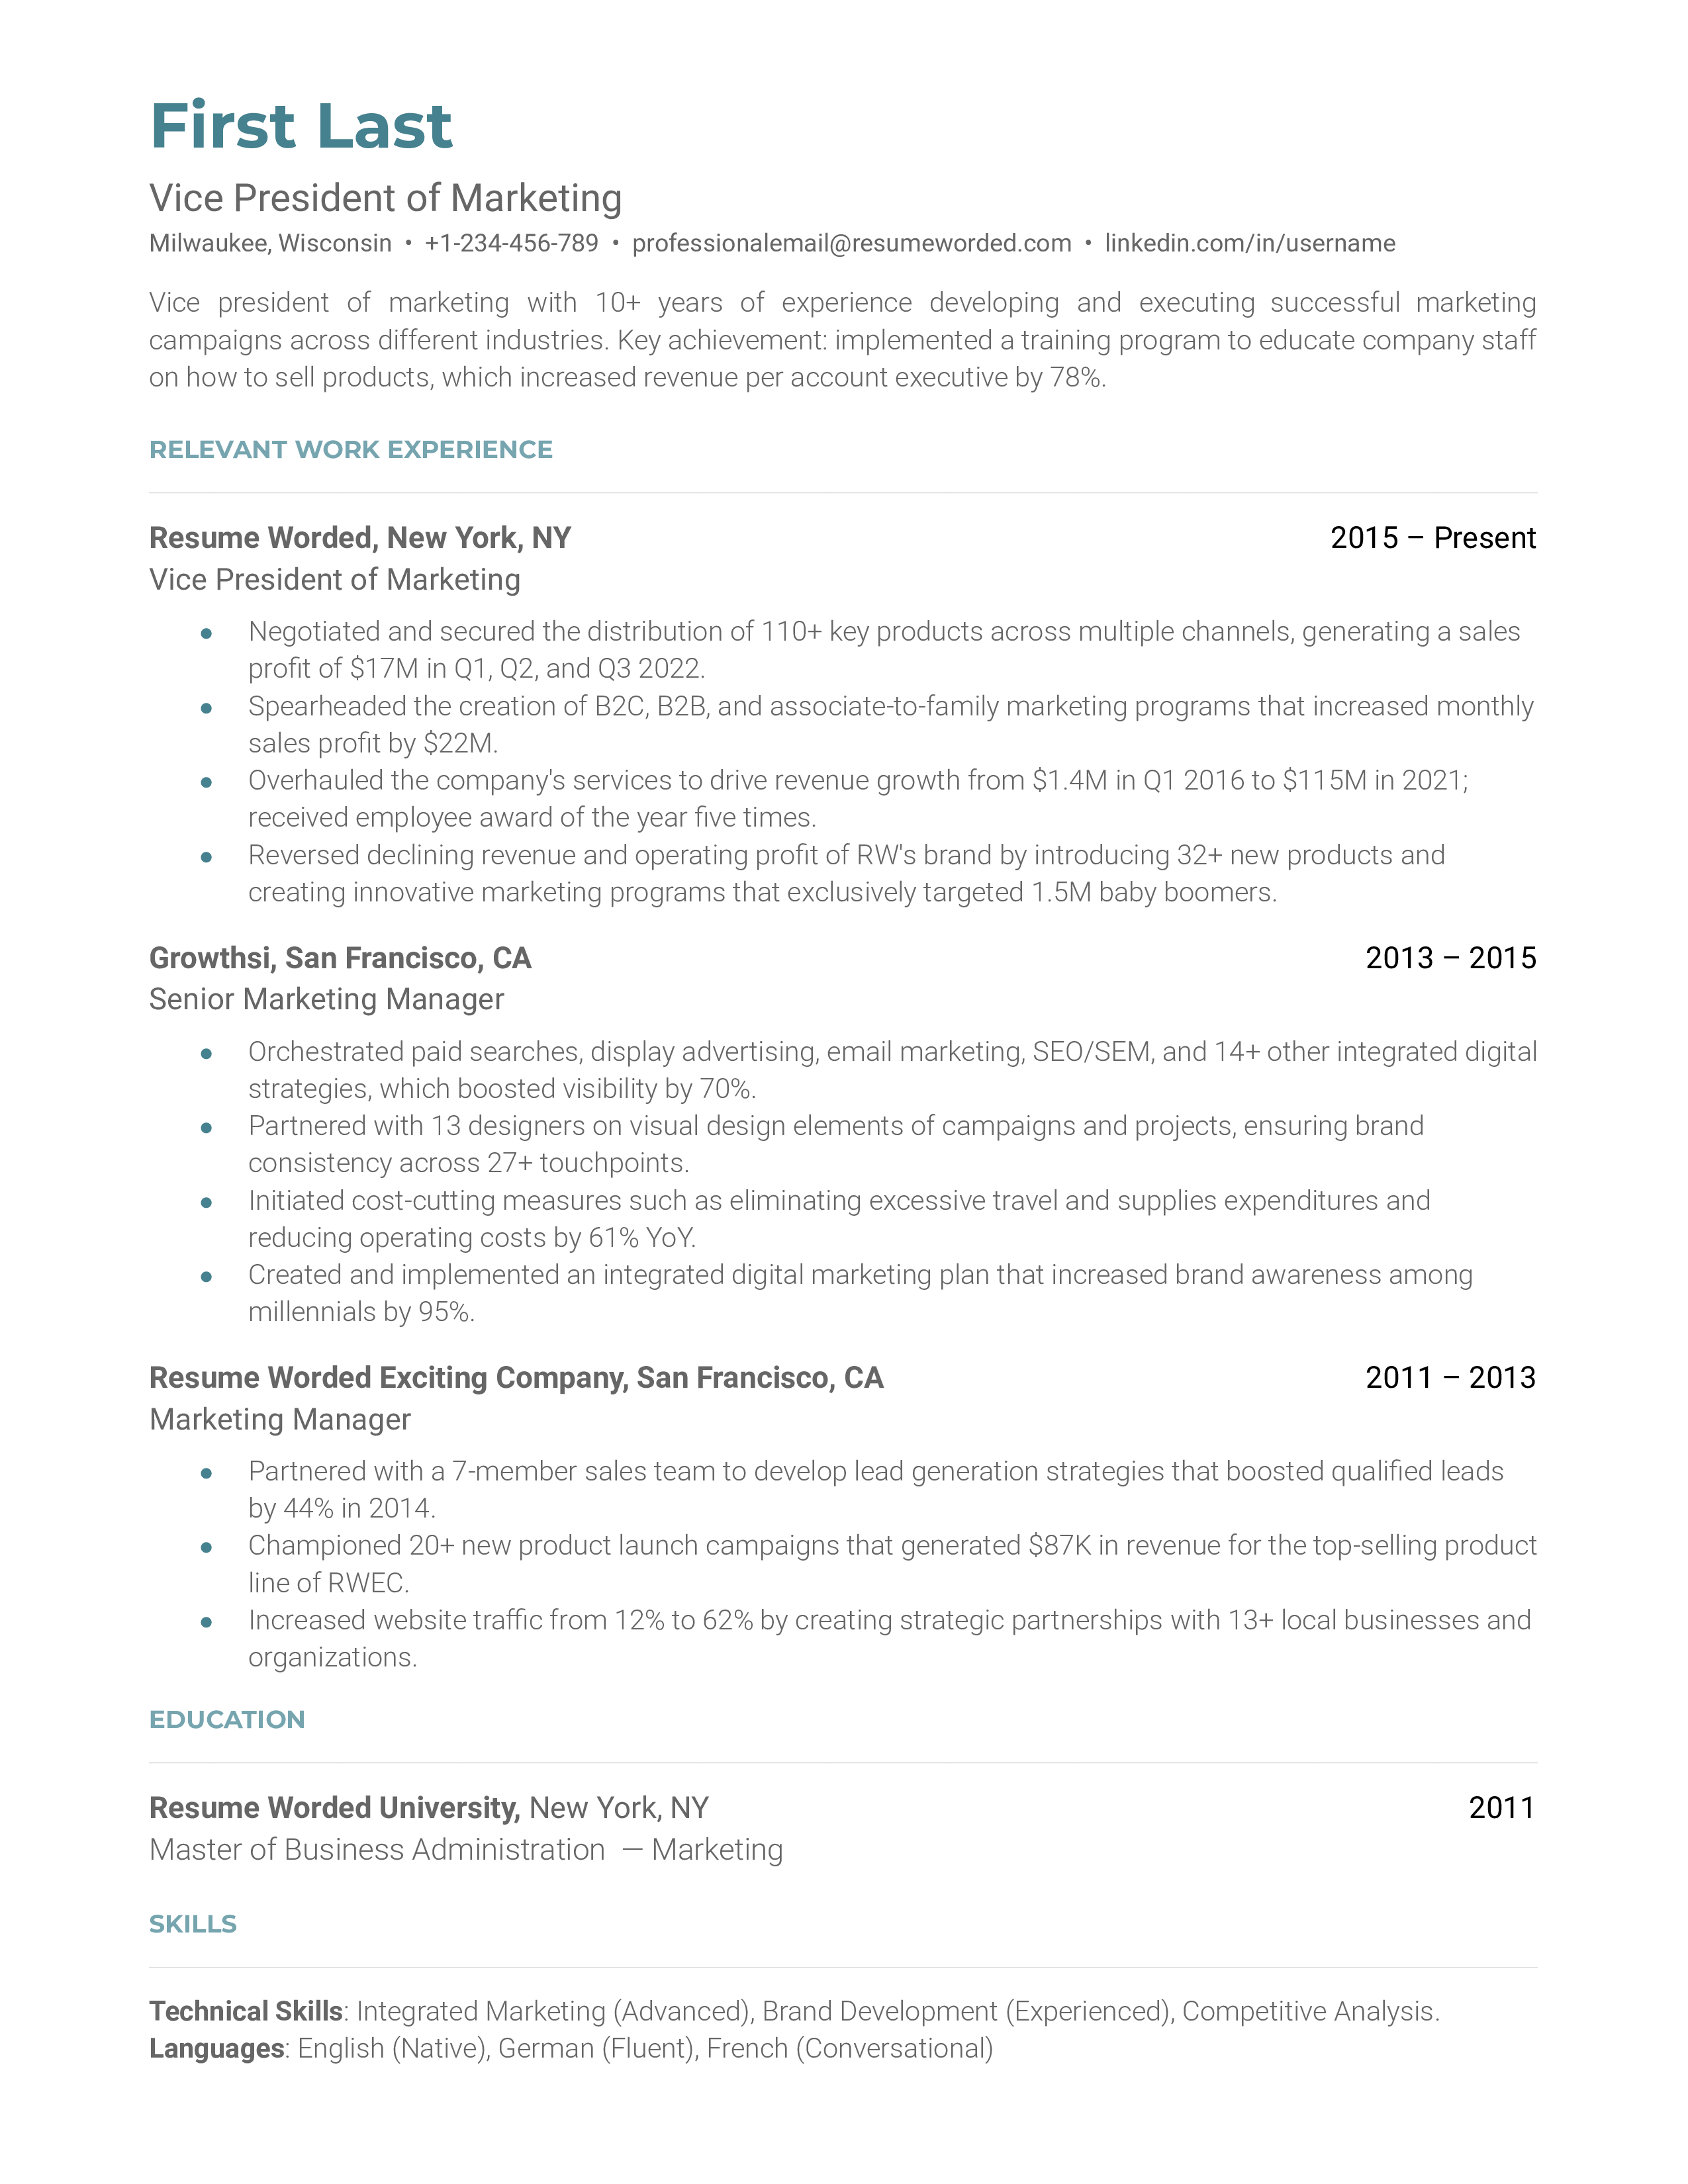 A vice president of marketing resume template that highlights achievements.